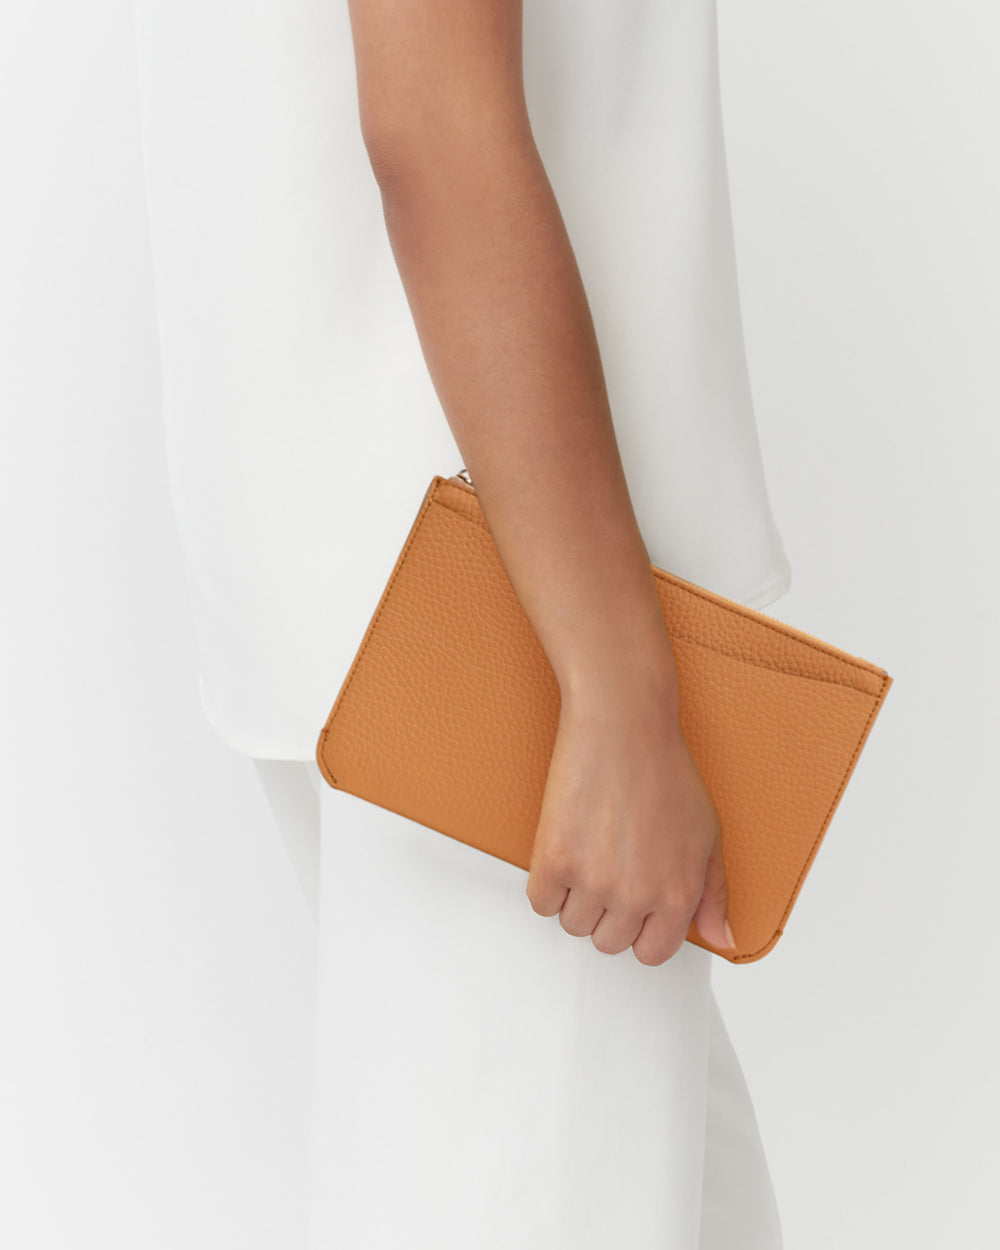 Person holding a small clutch bag